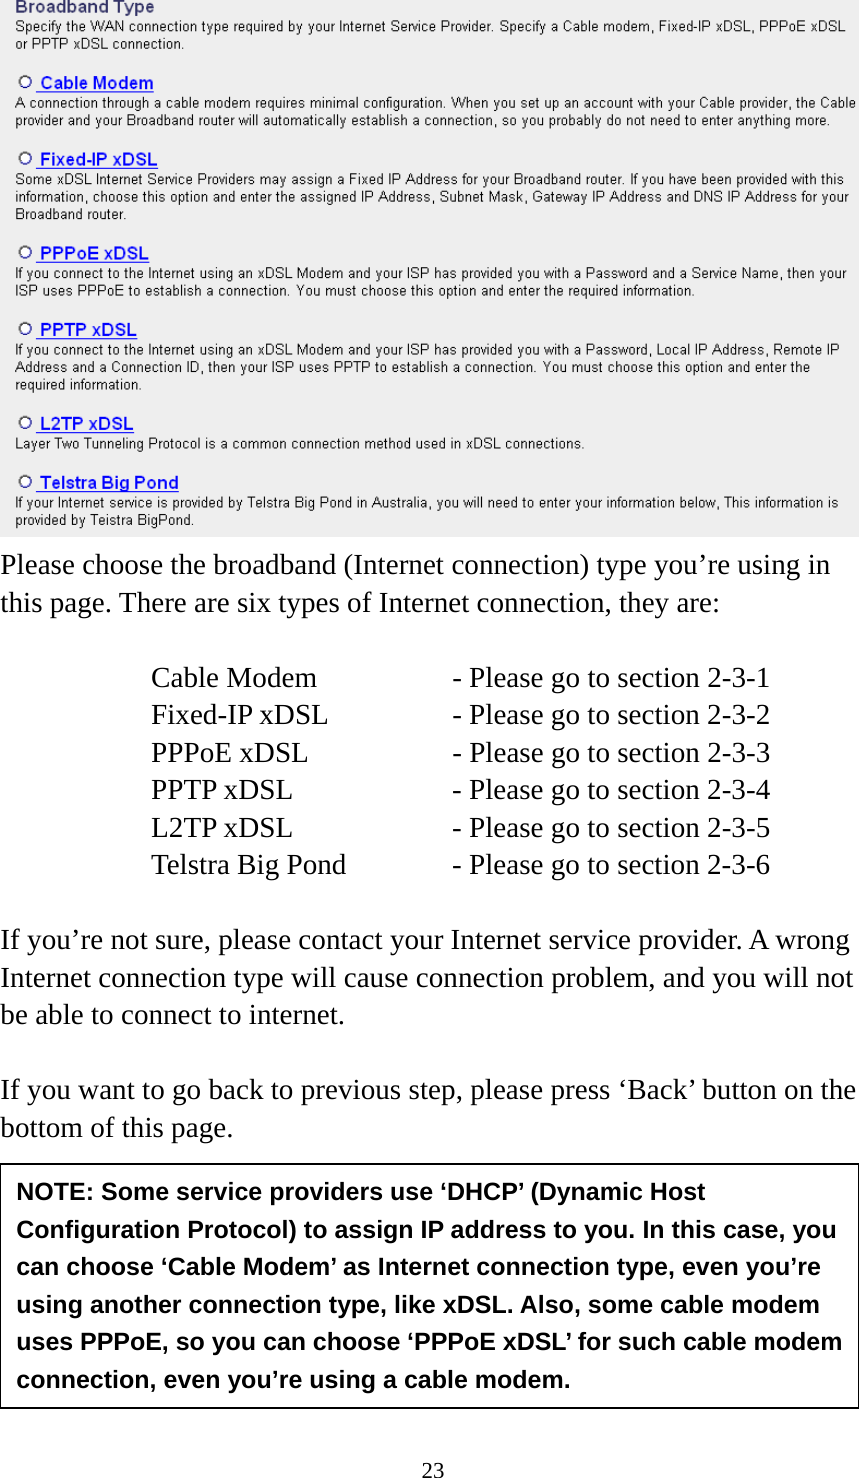 23  Please choose the broadband (Internet connection) type you’re using in this page. There are six types of Internet connection, they are:  Cable Modem      - Please go to section 2-3-1 Fixed-IP xDSL      - Please go to section 2-3-2 PPPoE xDSL      - Please go to section 2-3-3 PPTP xDSL       - Please go to section 2-3-4 L2TP xDSL       - Please go to section 2-3-5 Telstra Big Pond     - Please go to section 2-3-6  If you’re not sure, please contact your Internet service provider. A wrong Internet connection type will cause connection problem, and you will not be able to connect to internet.  If you want to go back to previous step, please press ‘Back’ button on the bottom of this page.      2-3-1 Setup procedure for ‘Cable Modem’:  NOTE: Some service providers use ‘DHCP’ (Dynamic Host Configuration Protocol) to assign IP address to you. In this case, you can choose ‘Cable Modem’ as Internet connection type, even you’re using another connection type, like xDSL. Also, some cable modem uses PPPoE, so you can choose ‘PPPoE xDSL’ for such cable modem connection, even you’re using a cable modem. 